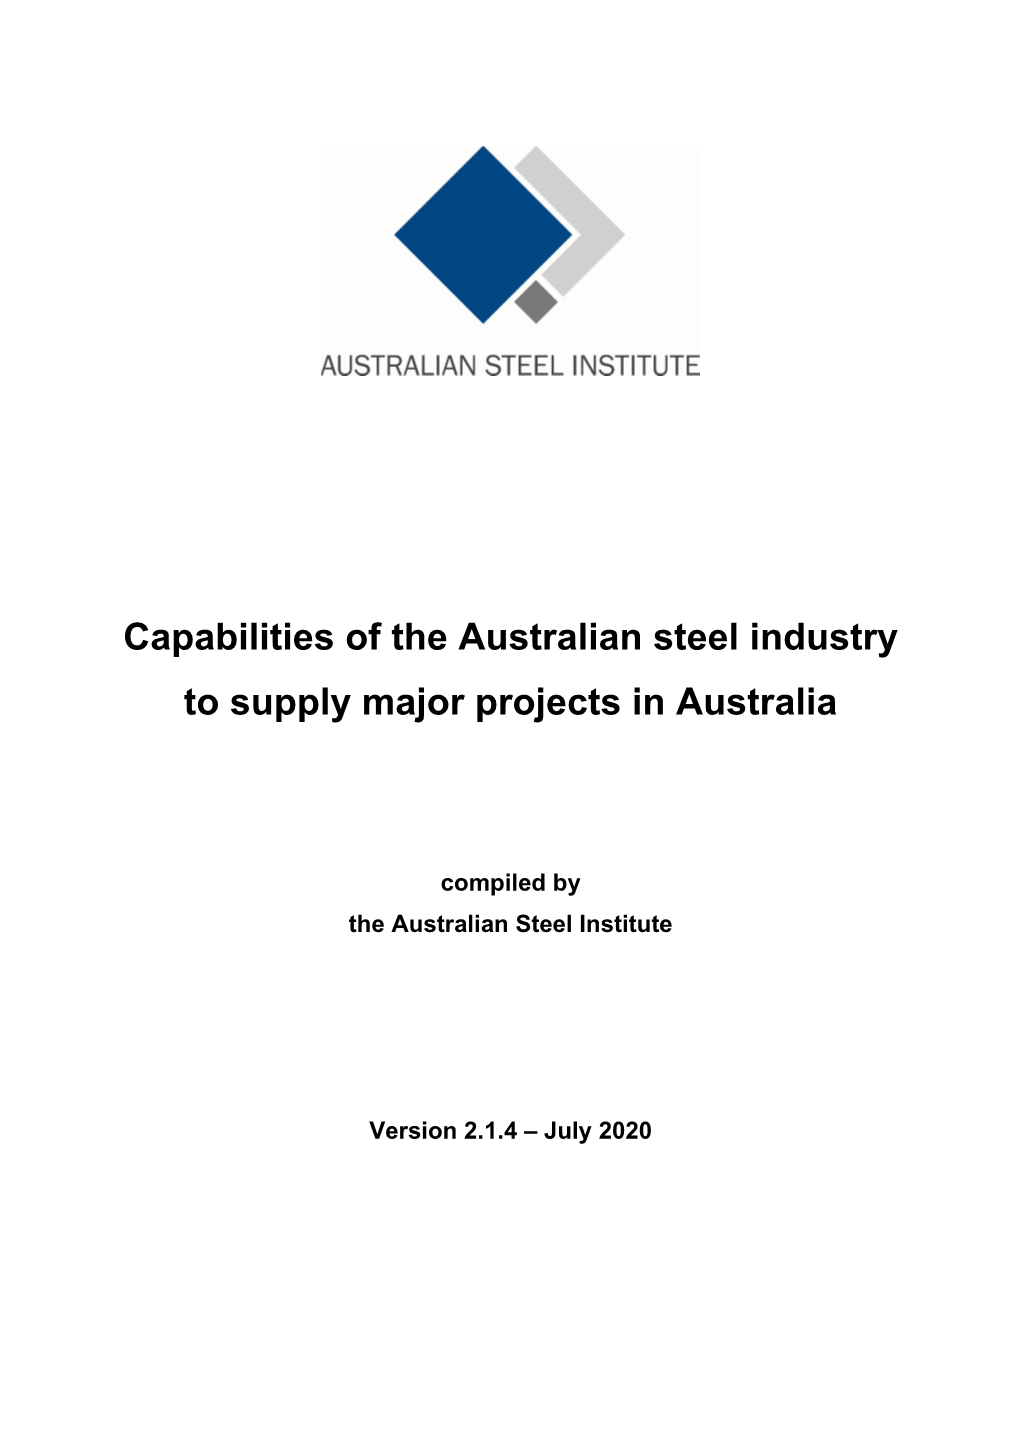 Capabilities of the Australian Steel Industry to Supply Major Projects in Australia